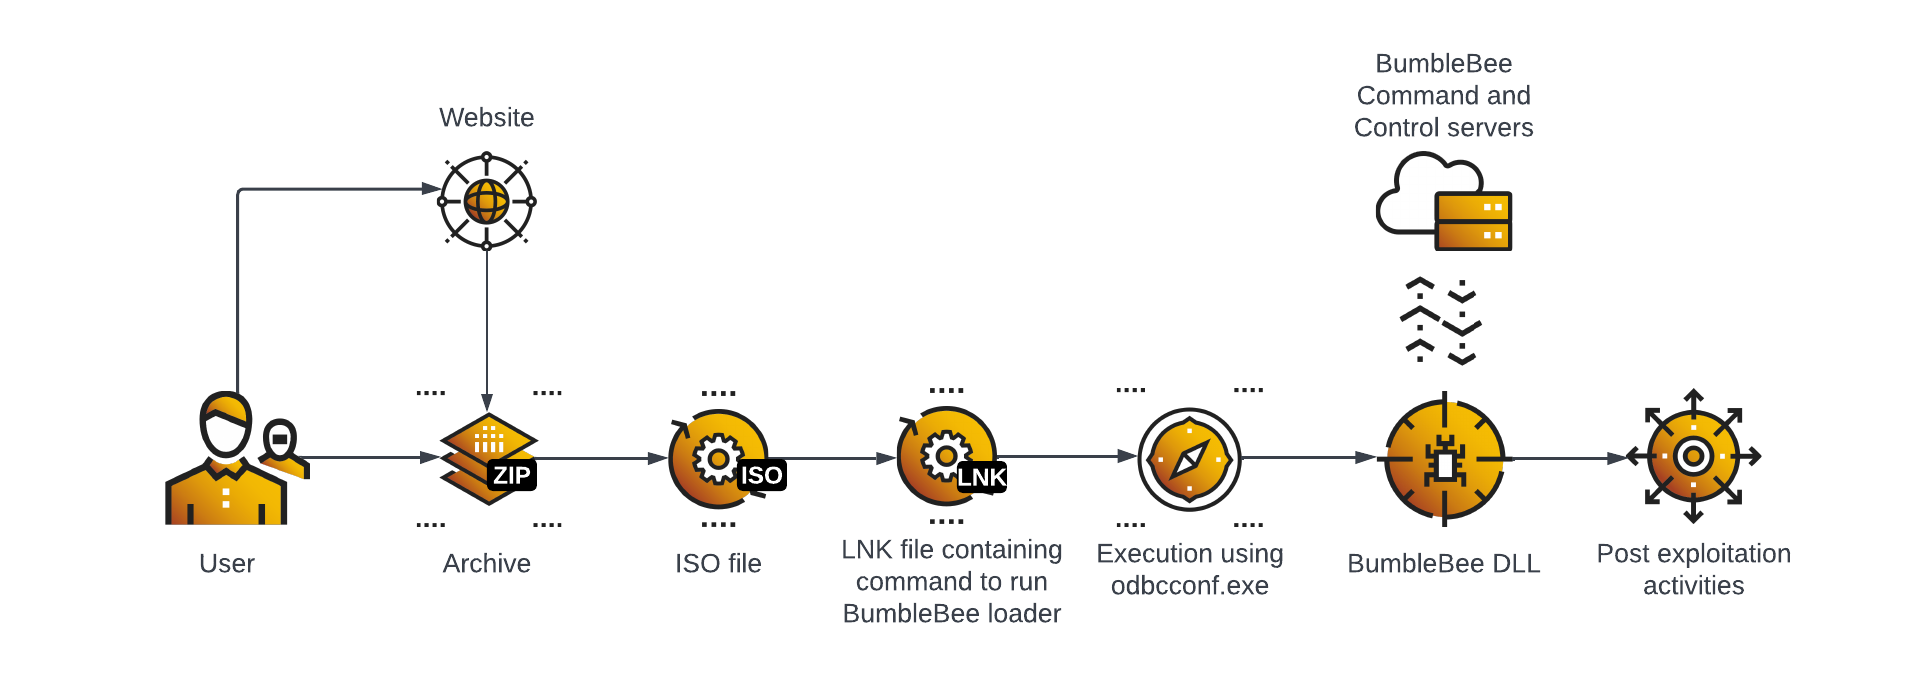 Bumblebee attacks, from initial access to the compromise of Active Directory Services